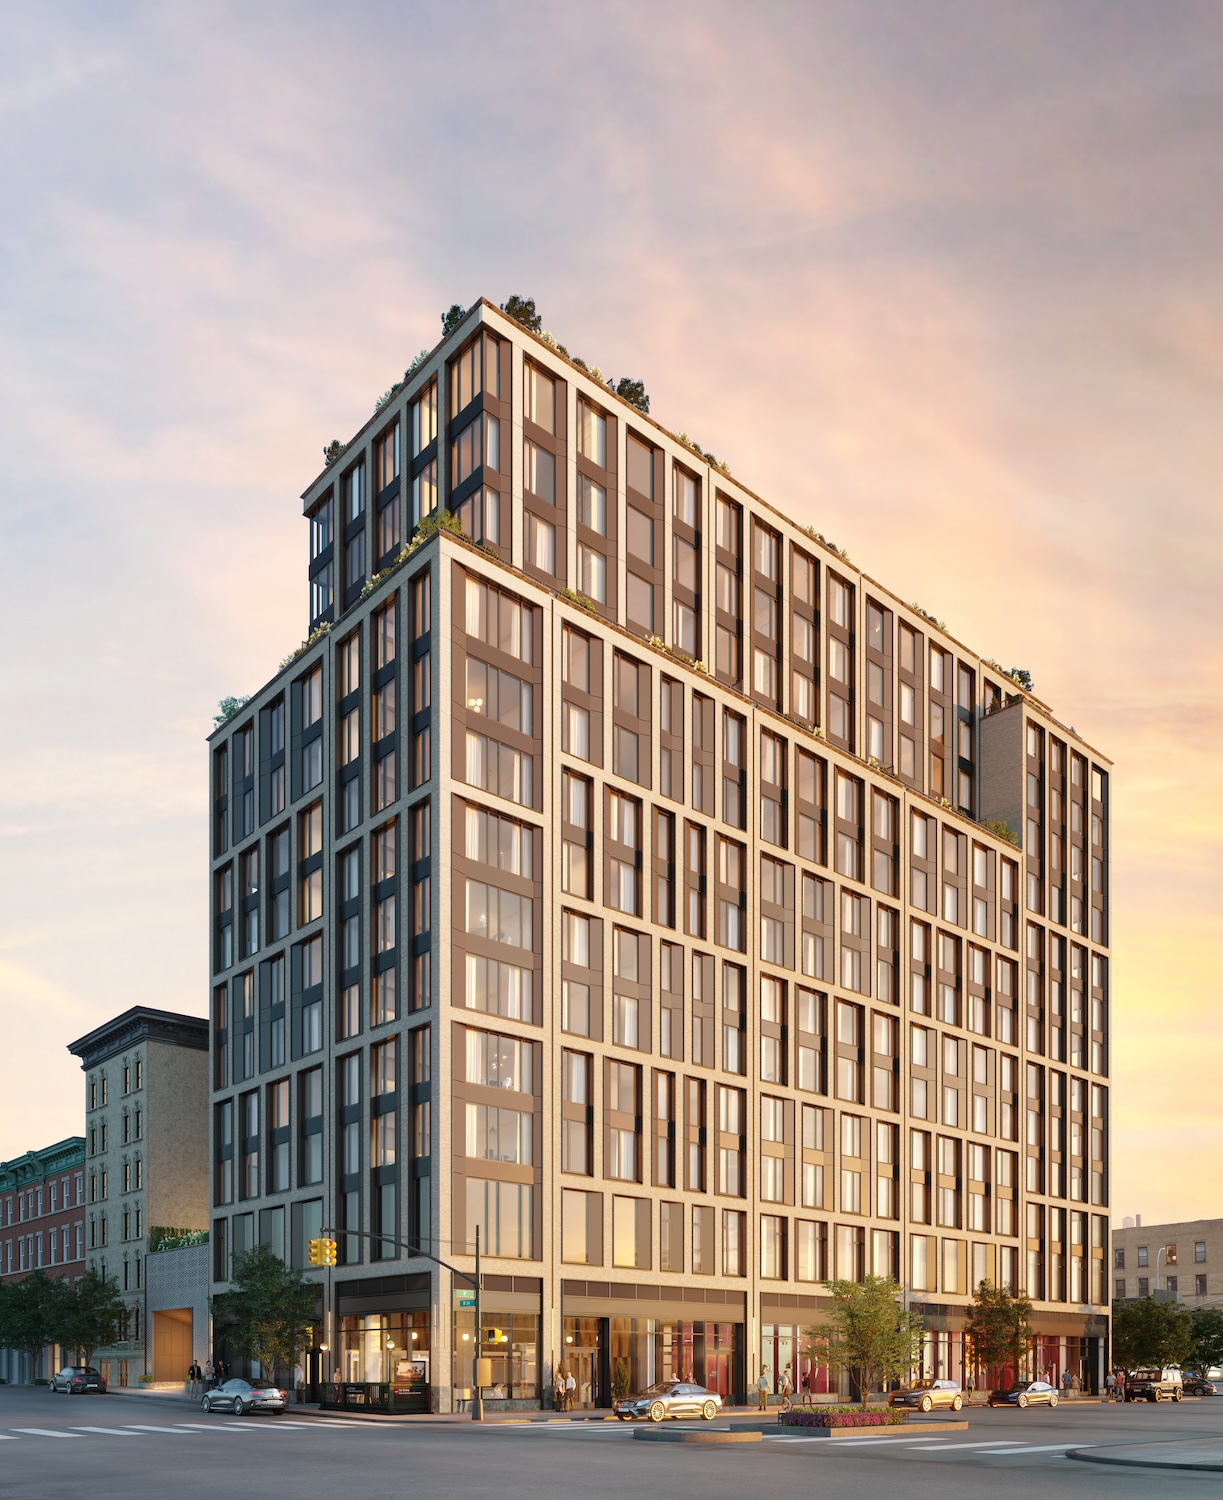 Rendering of 280 West 24th Street, by FXCollaborative